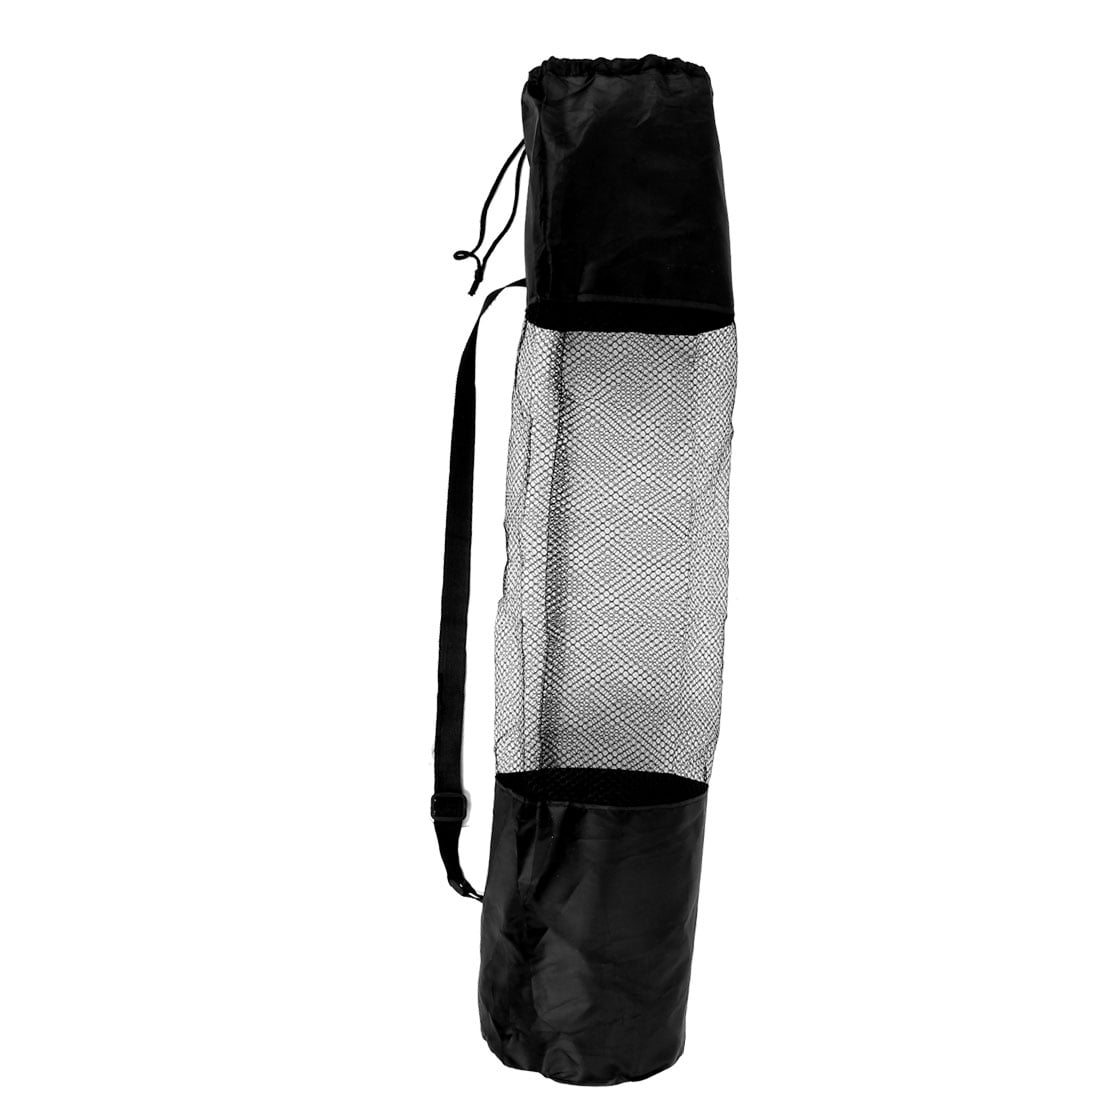 Yoga/Pilates Mat Bag with Adjustable Carry Strap Fits Mat 6mm white & black 